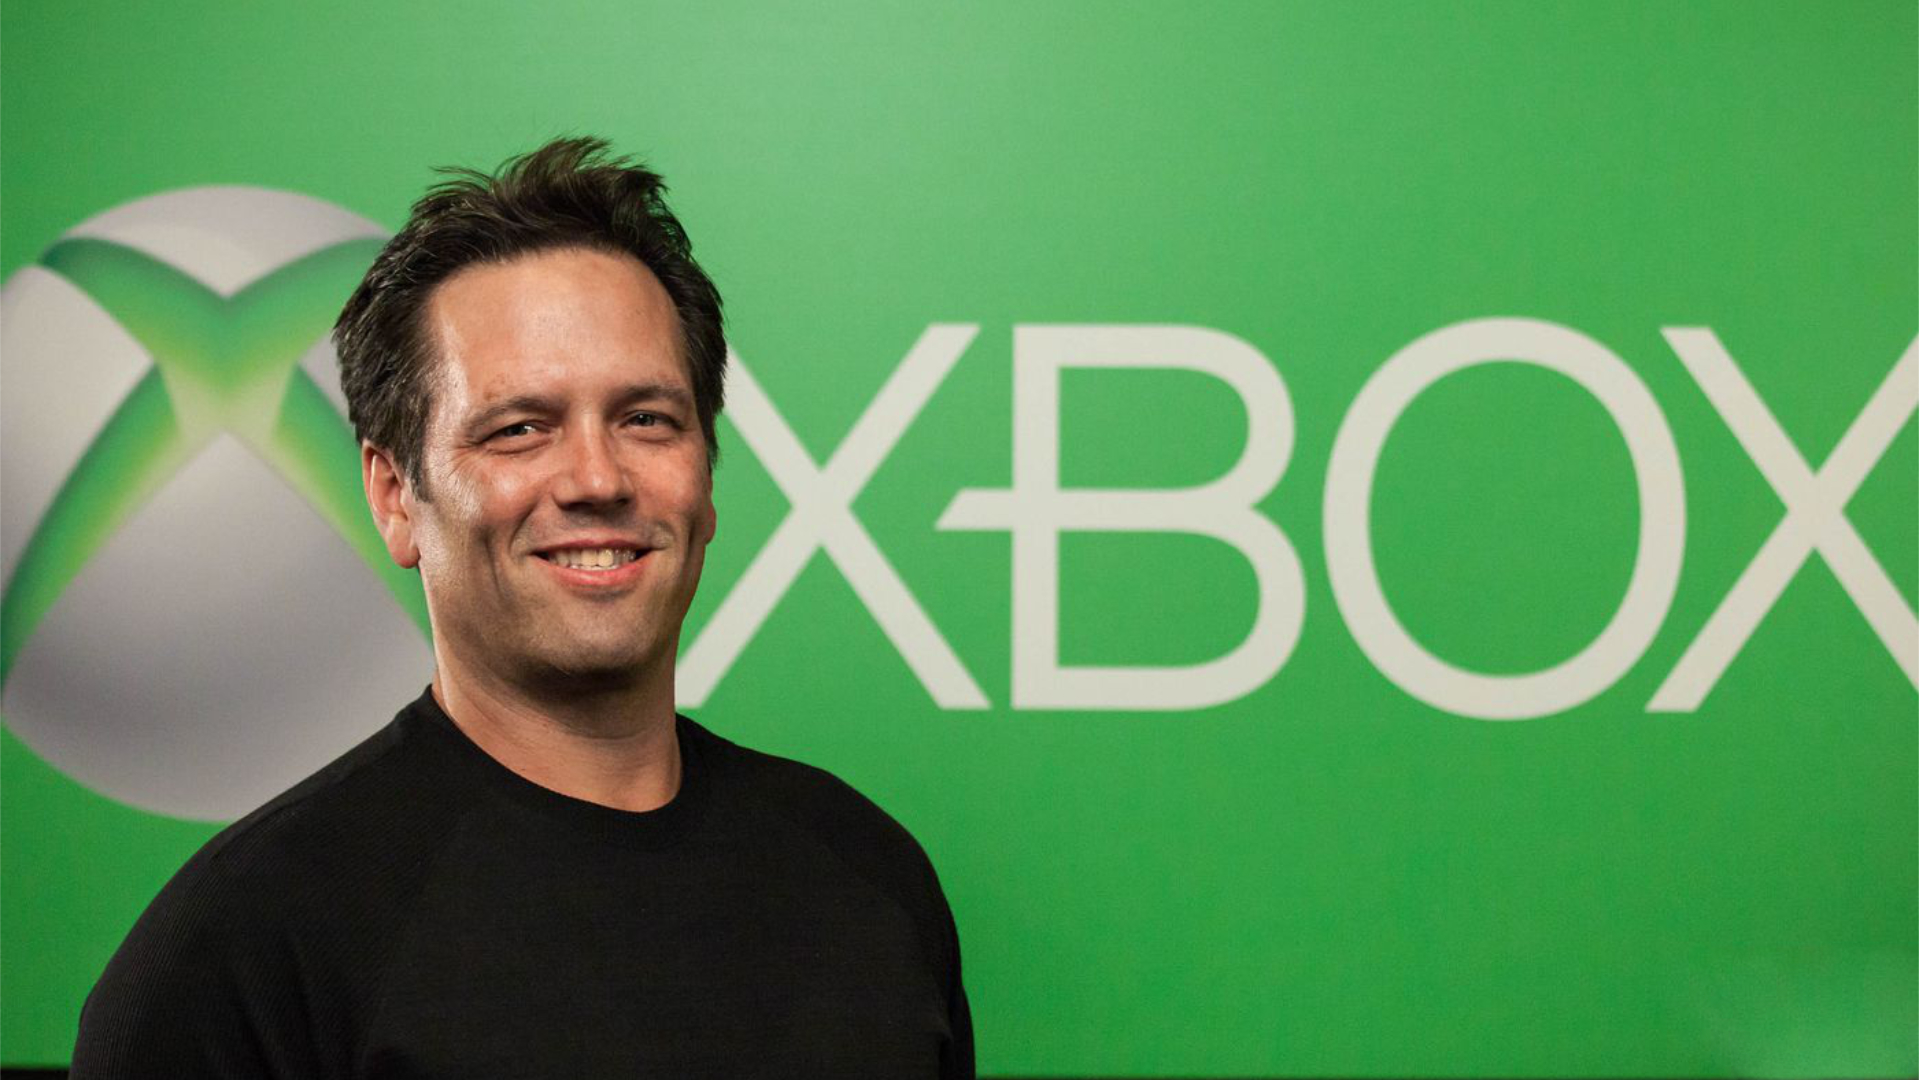 Phil Spencer on Xbox FTC leaks: 'We will be better going forward